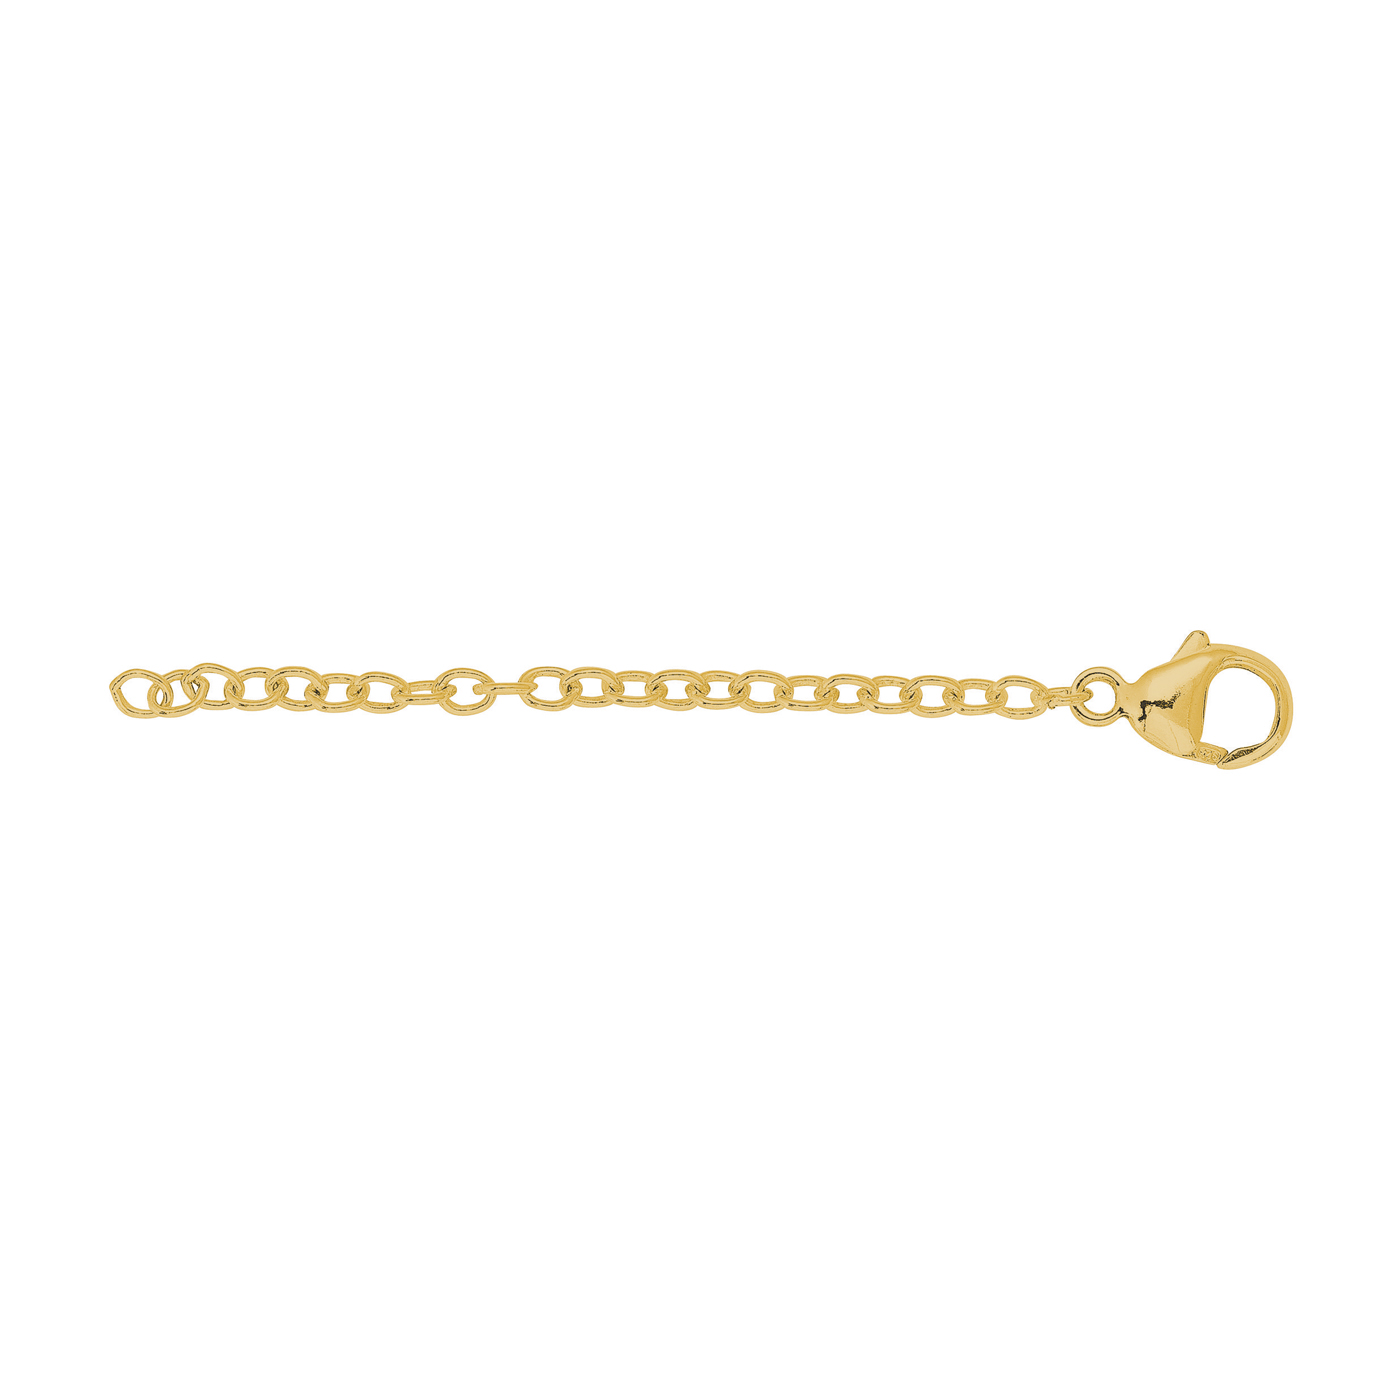 Elongation Chain, Rolled Gold, 70 mm - 1 piece